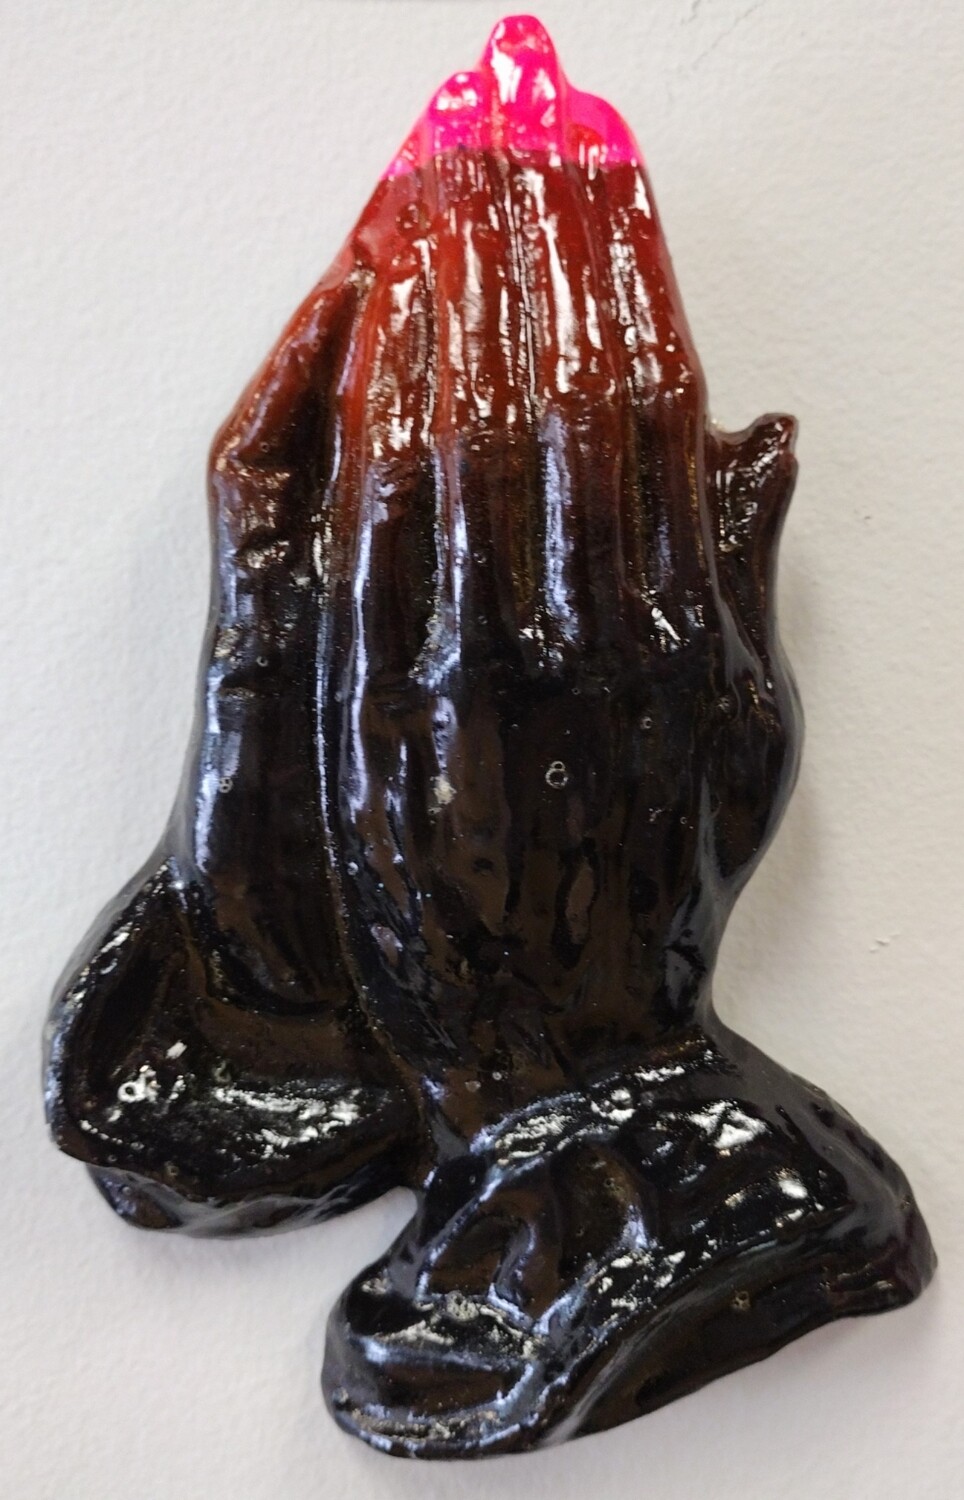 Preying Hands - Sculptures by Alli Good